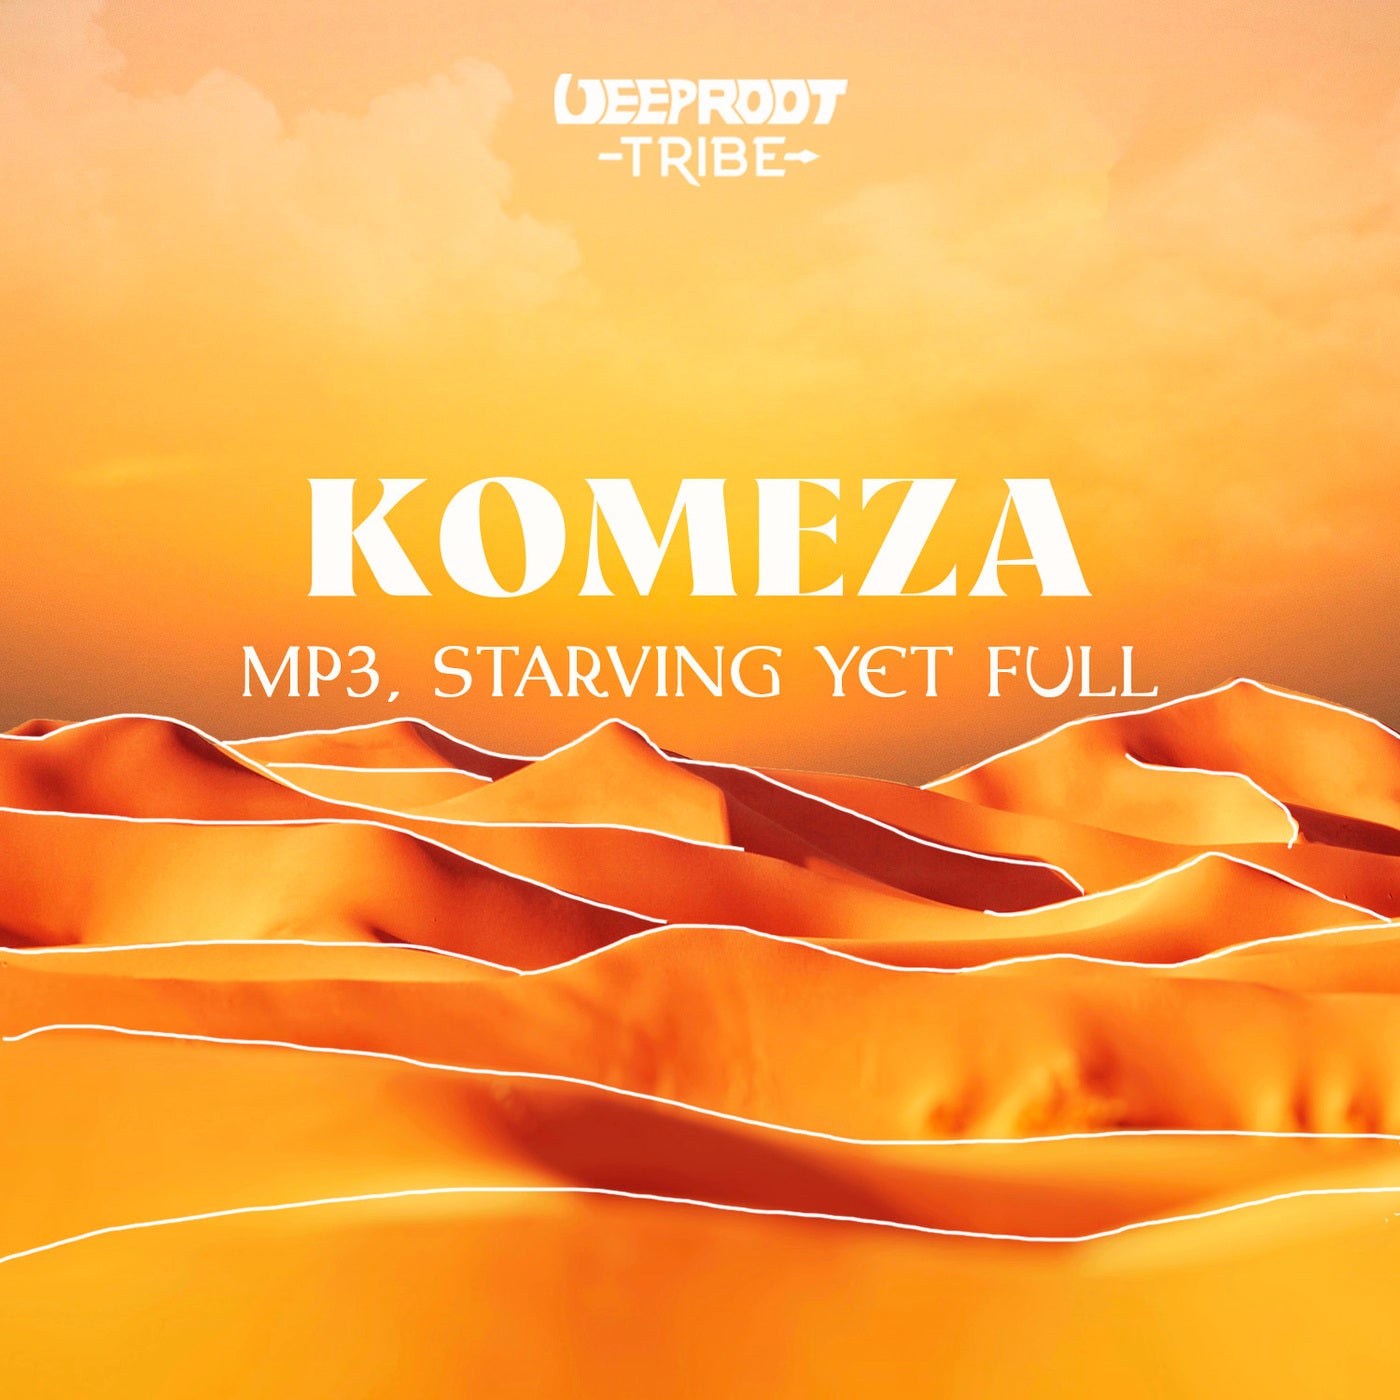 image cover: Starving Yet Full, MP3 (DE) - Komeza on Deep Root Tribe